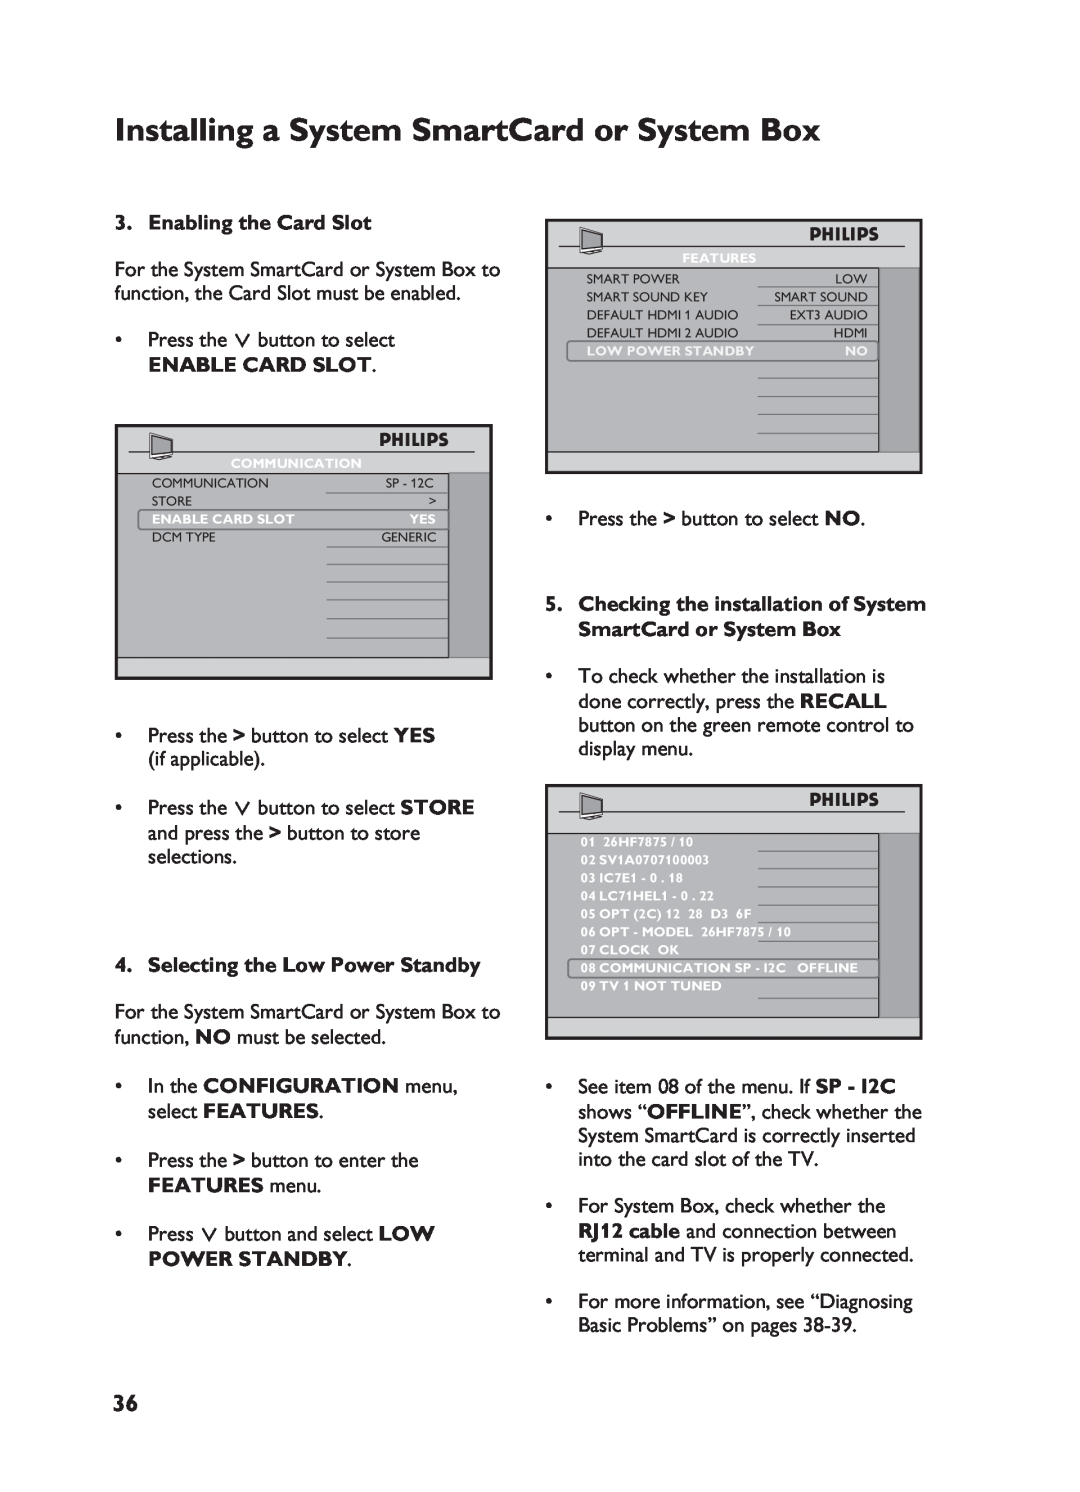 Philips 32HF7875, 32HF5445 user manual Enabling the Card Slot, Enable Card Slot, Selecting the Low Power Standby 